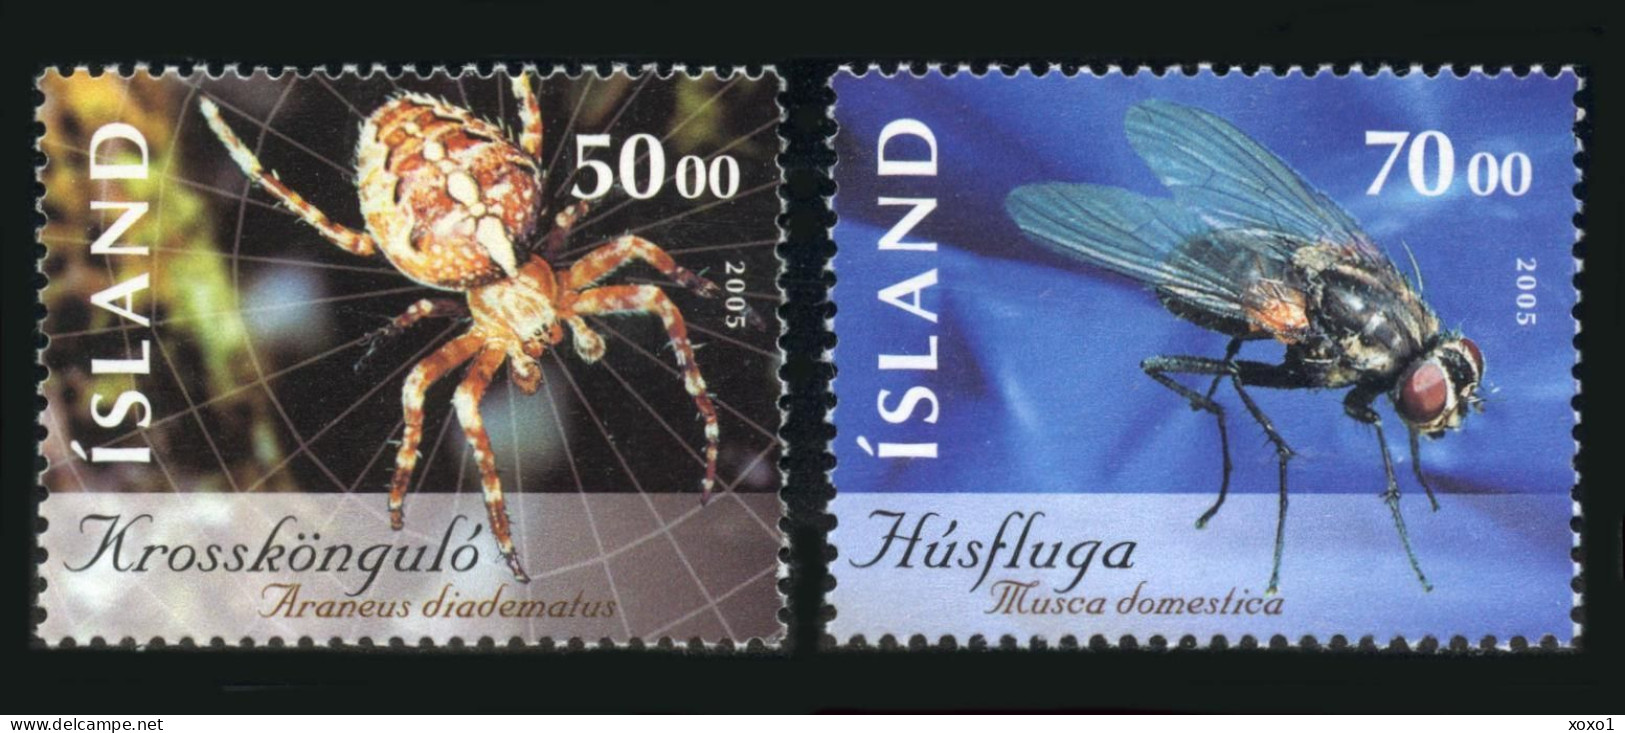 Iceland 2005  MiNr. 1075 - 1076 Island Insects And Spiders  # 2     2v  MNH** 3.50 € - Escarabajos